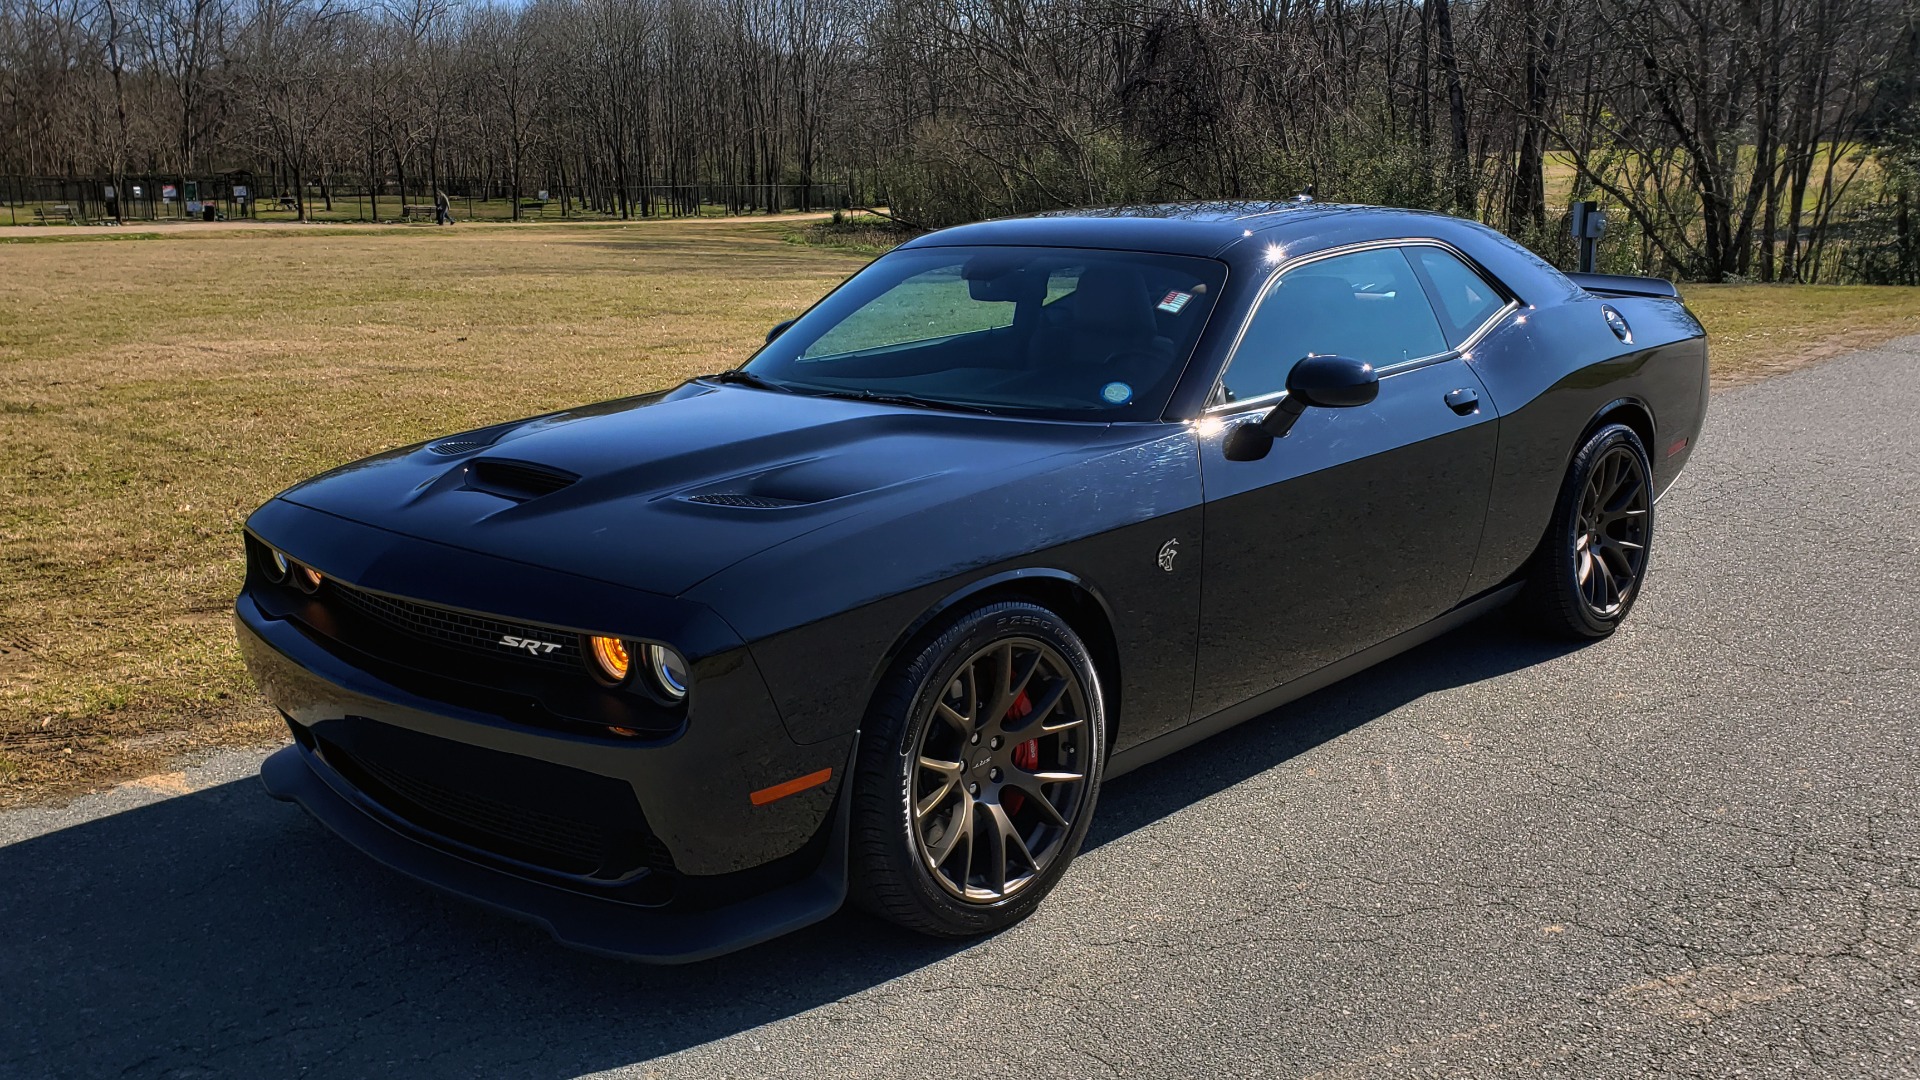 Used 2016 Dodge CHALLENGER SRT HELLCAT / NAV / SUNROOF / REARVIEW / BRASS MONKEY for sale Sold at Formula Imports in Charlotte NC 28227 1